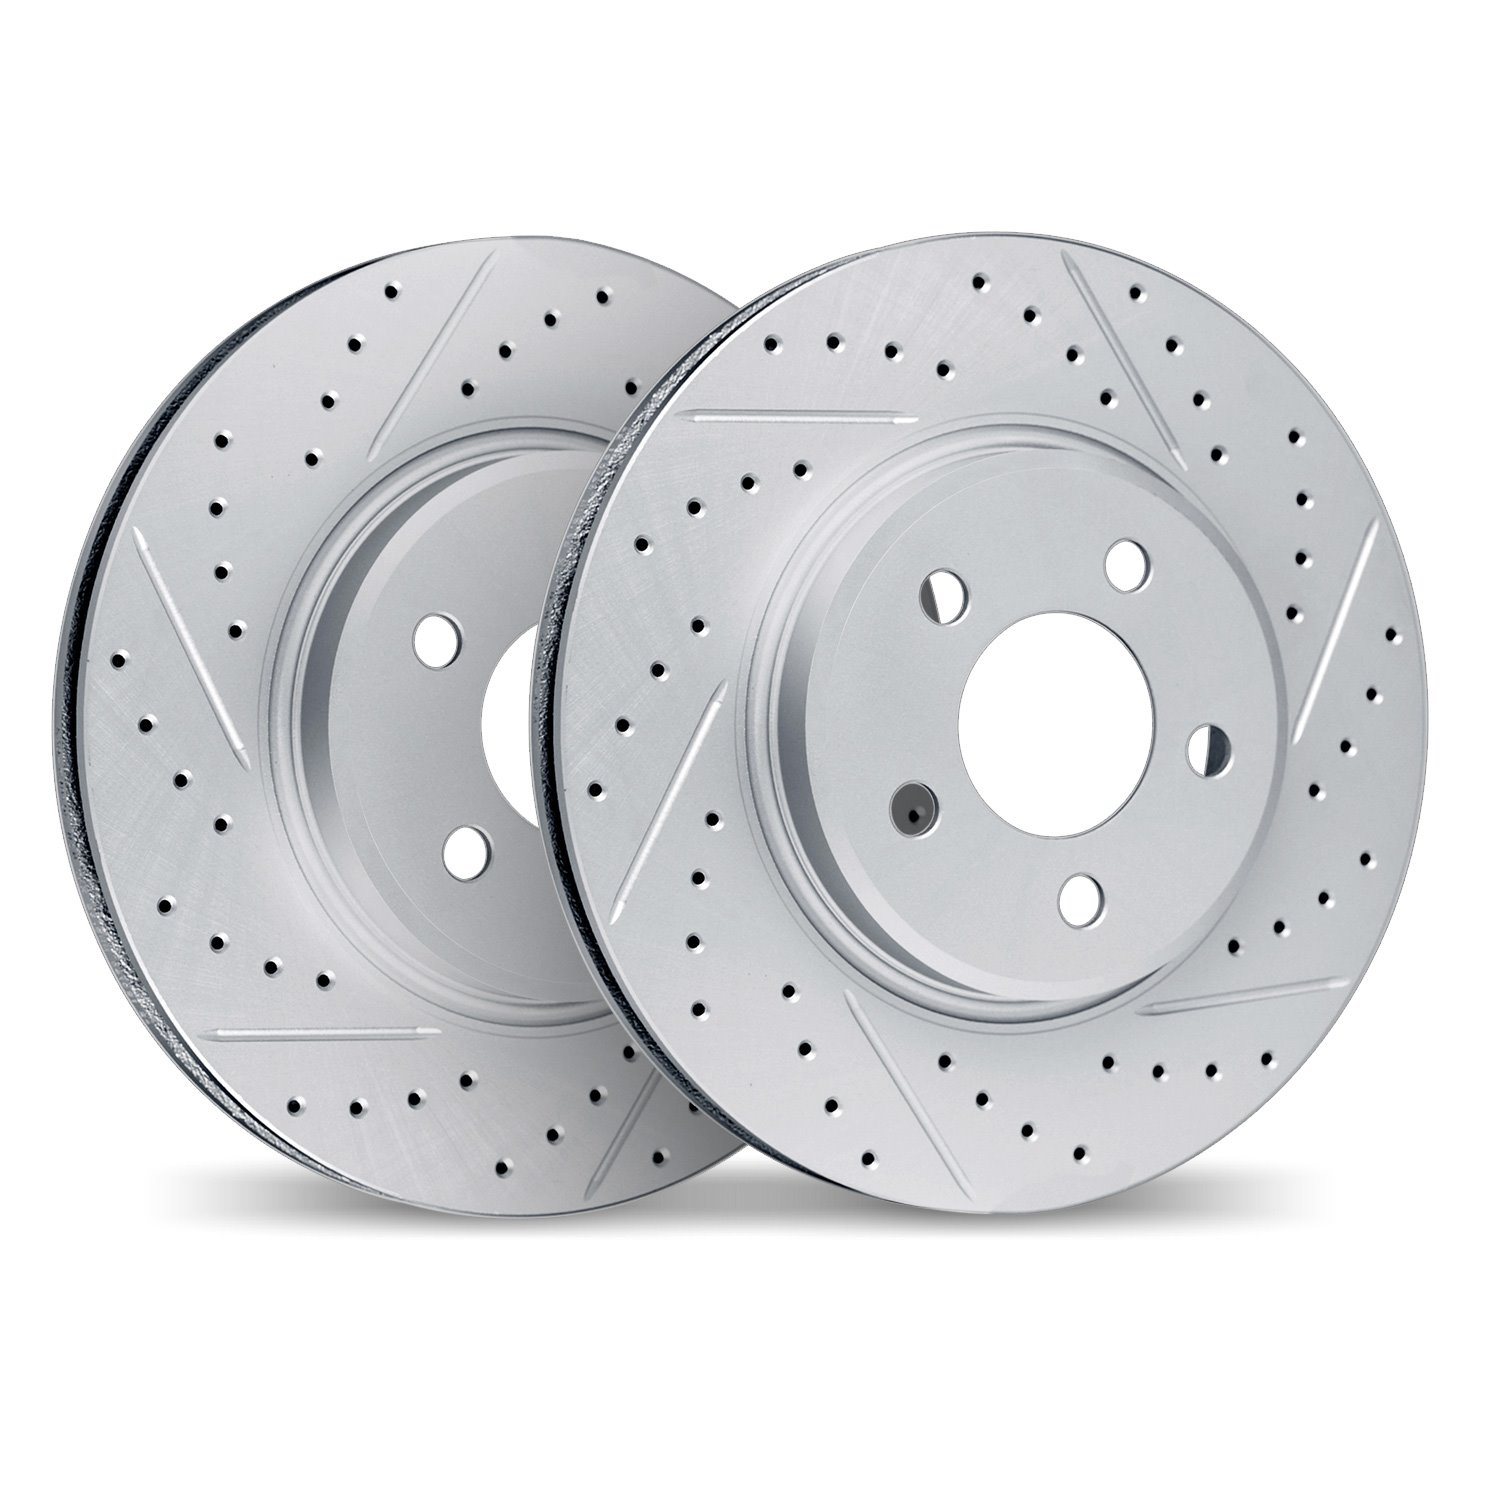 2002-54100 Geoperformance Drilled/Slotted Brake Rotors, 2015-2020 Ford/Lincoln/Mercury/Mazda, Position: Front